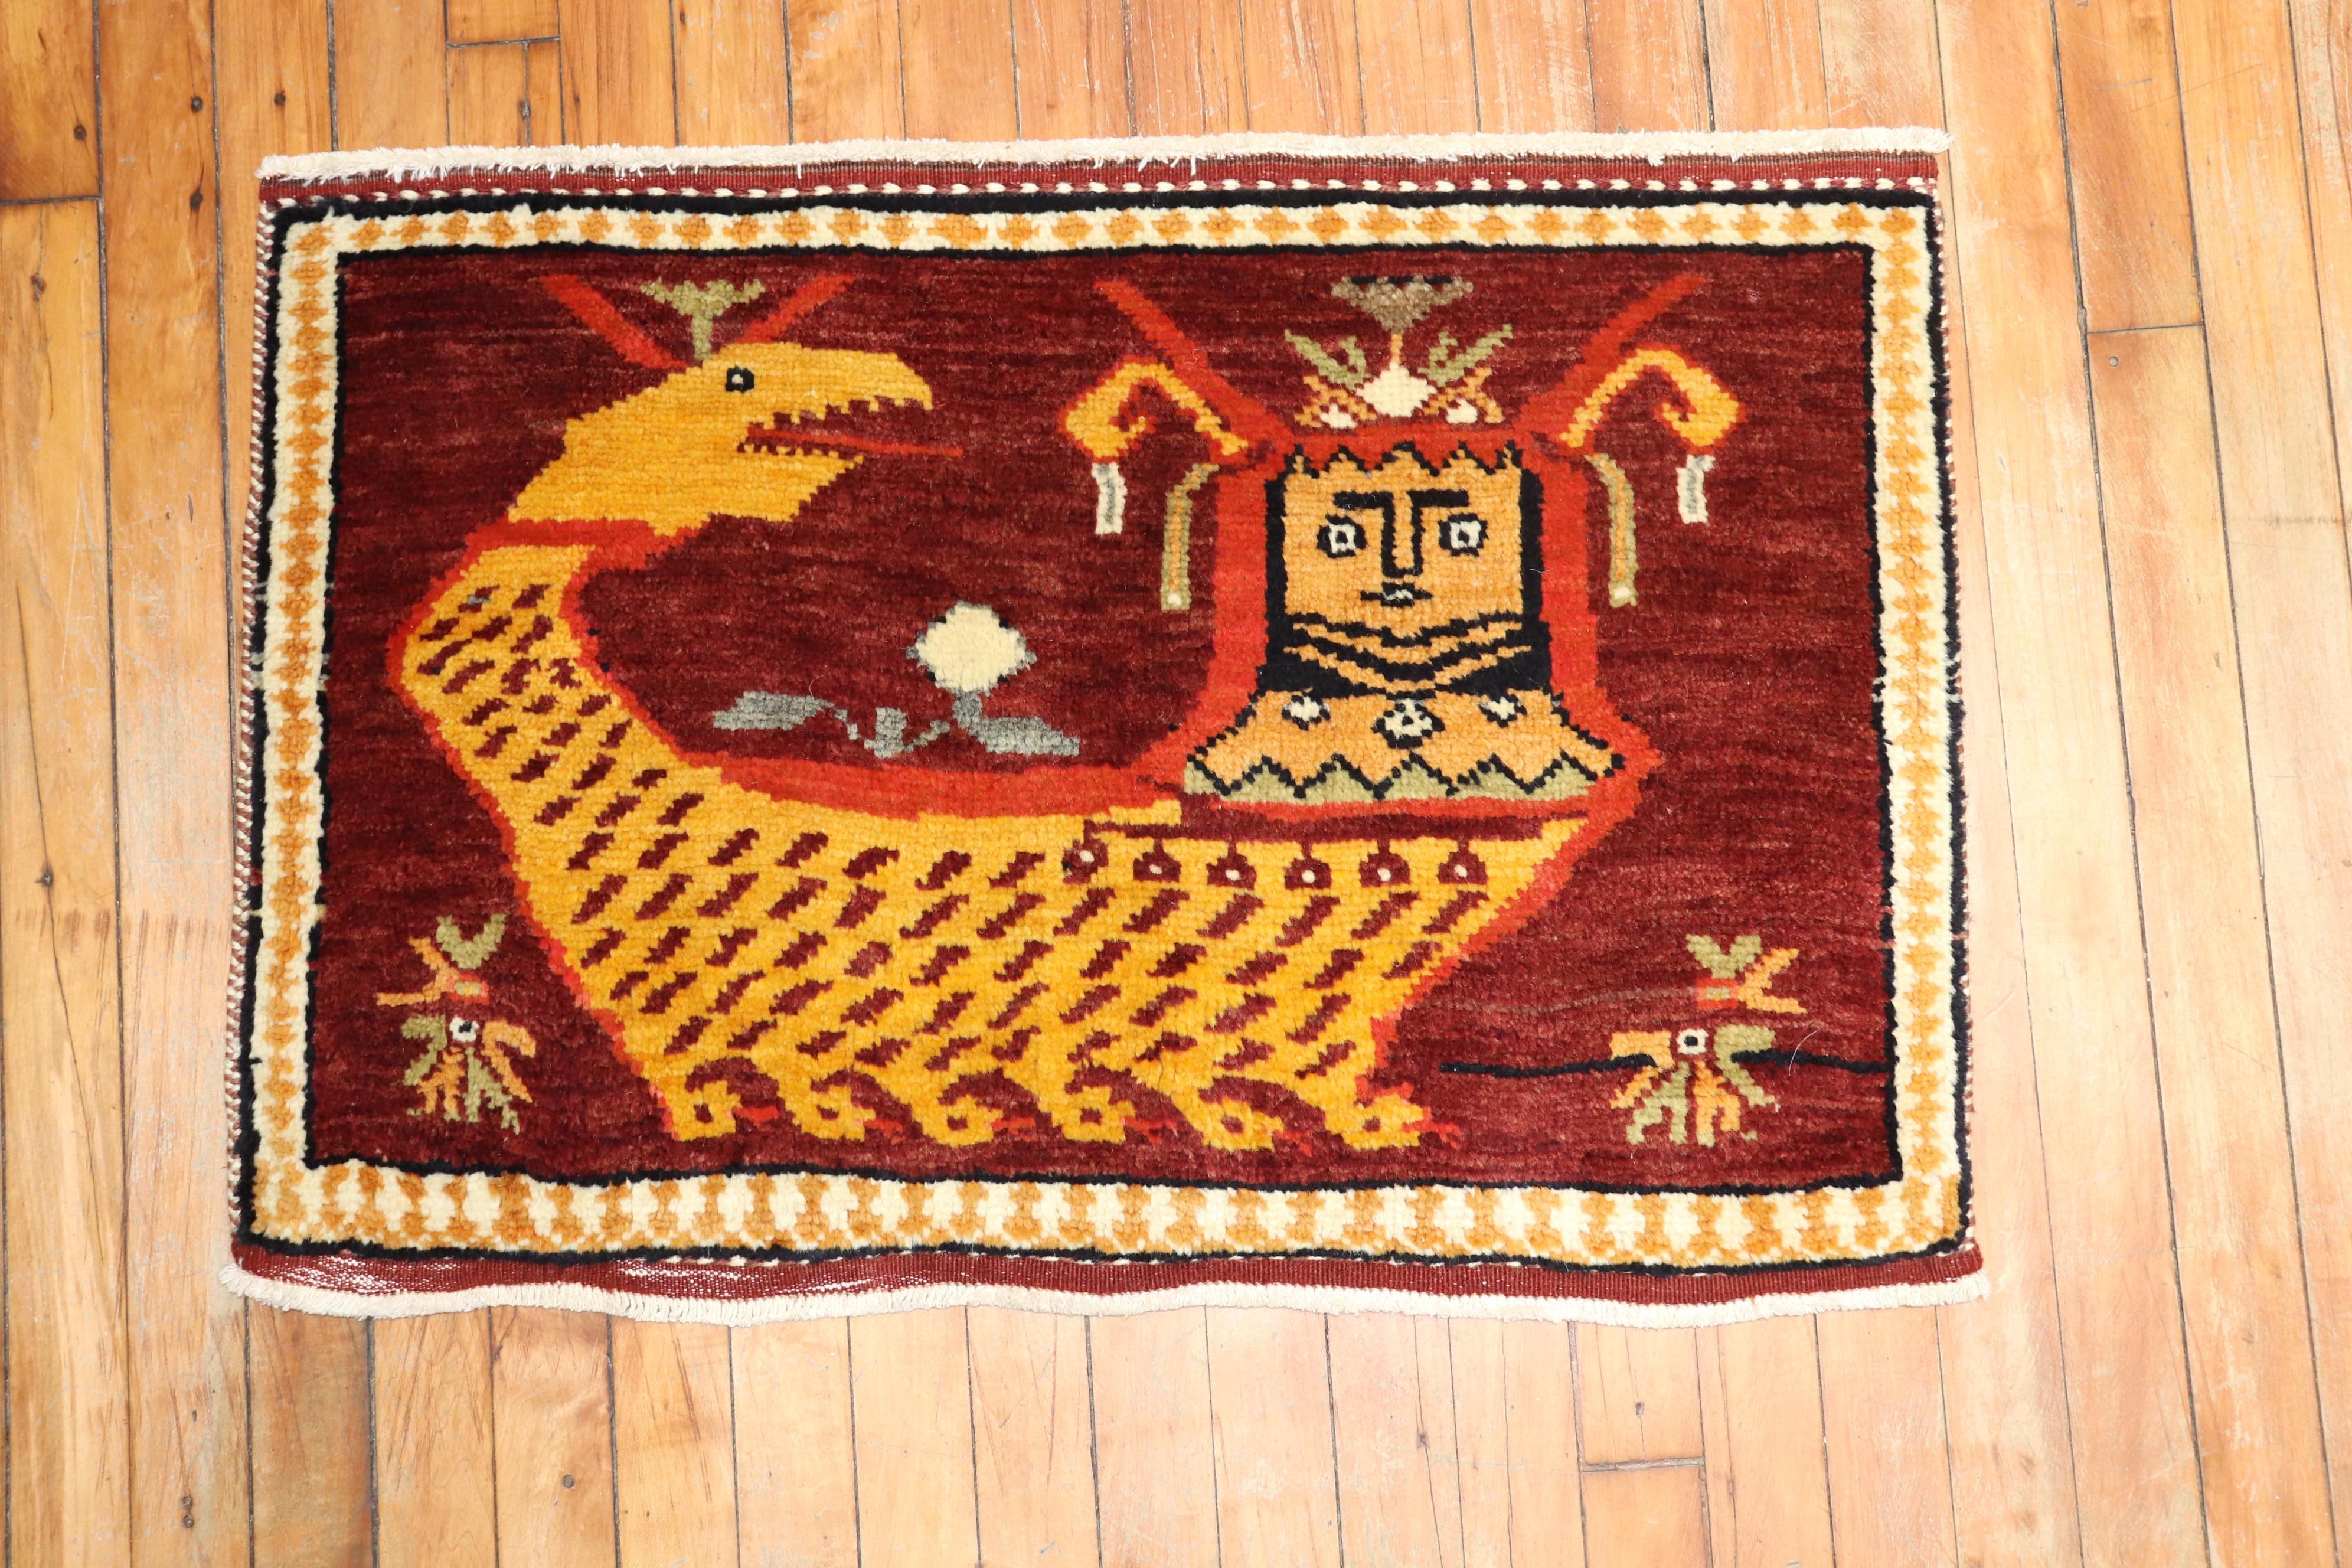 Late 20th century one of a kind Turkish pictorial Rug

Measures: 1'11